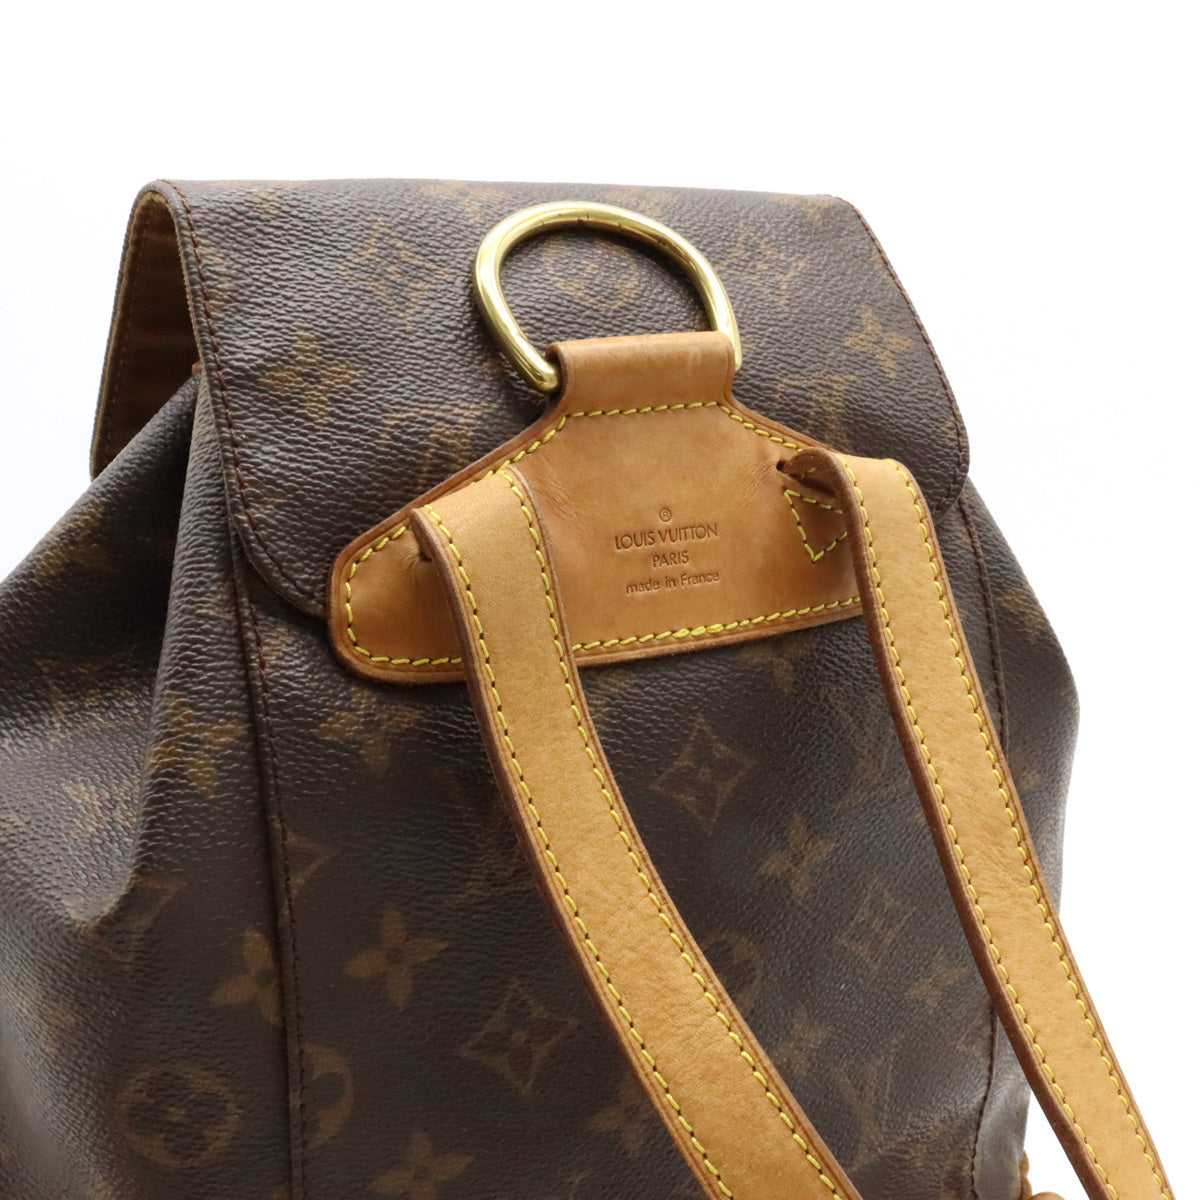 LV Montsouris backpack new